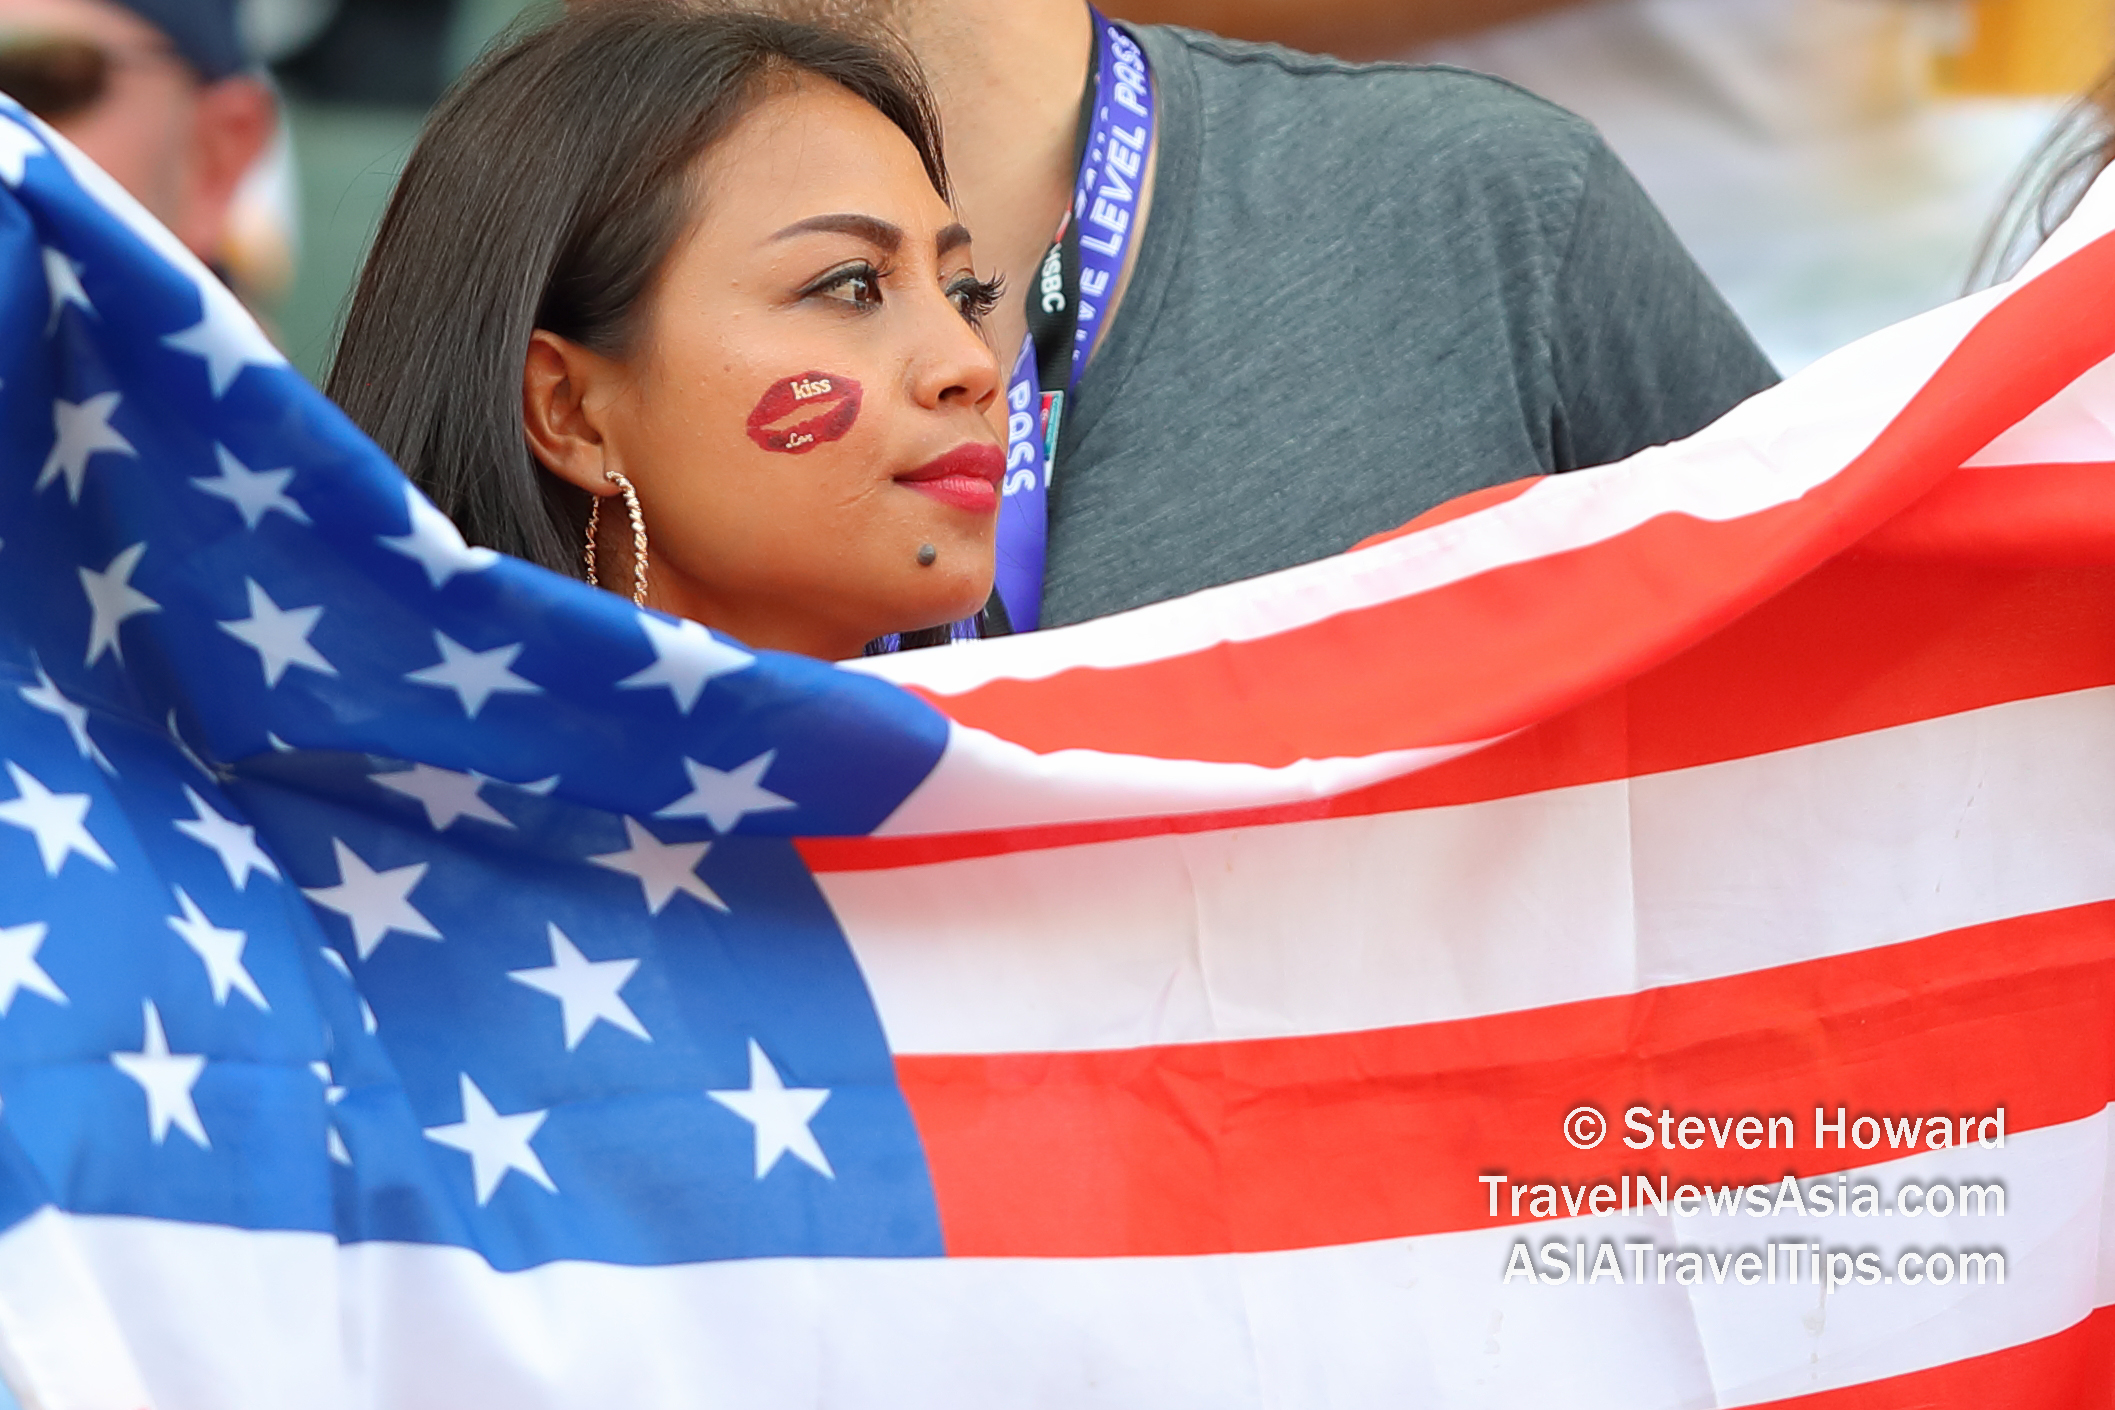 USA rugby fan at the 2019 Cathay Pacific / HSBC Hong Kong Sevens - a major international event which highlights perfectly the value of sport tourism. Picture by Steven Howard of TravelNewsAsia.com Click to enlarge.